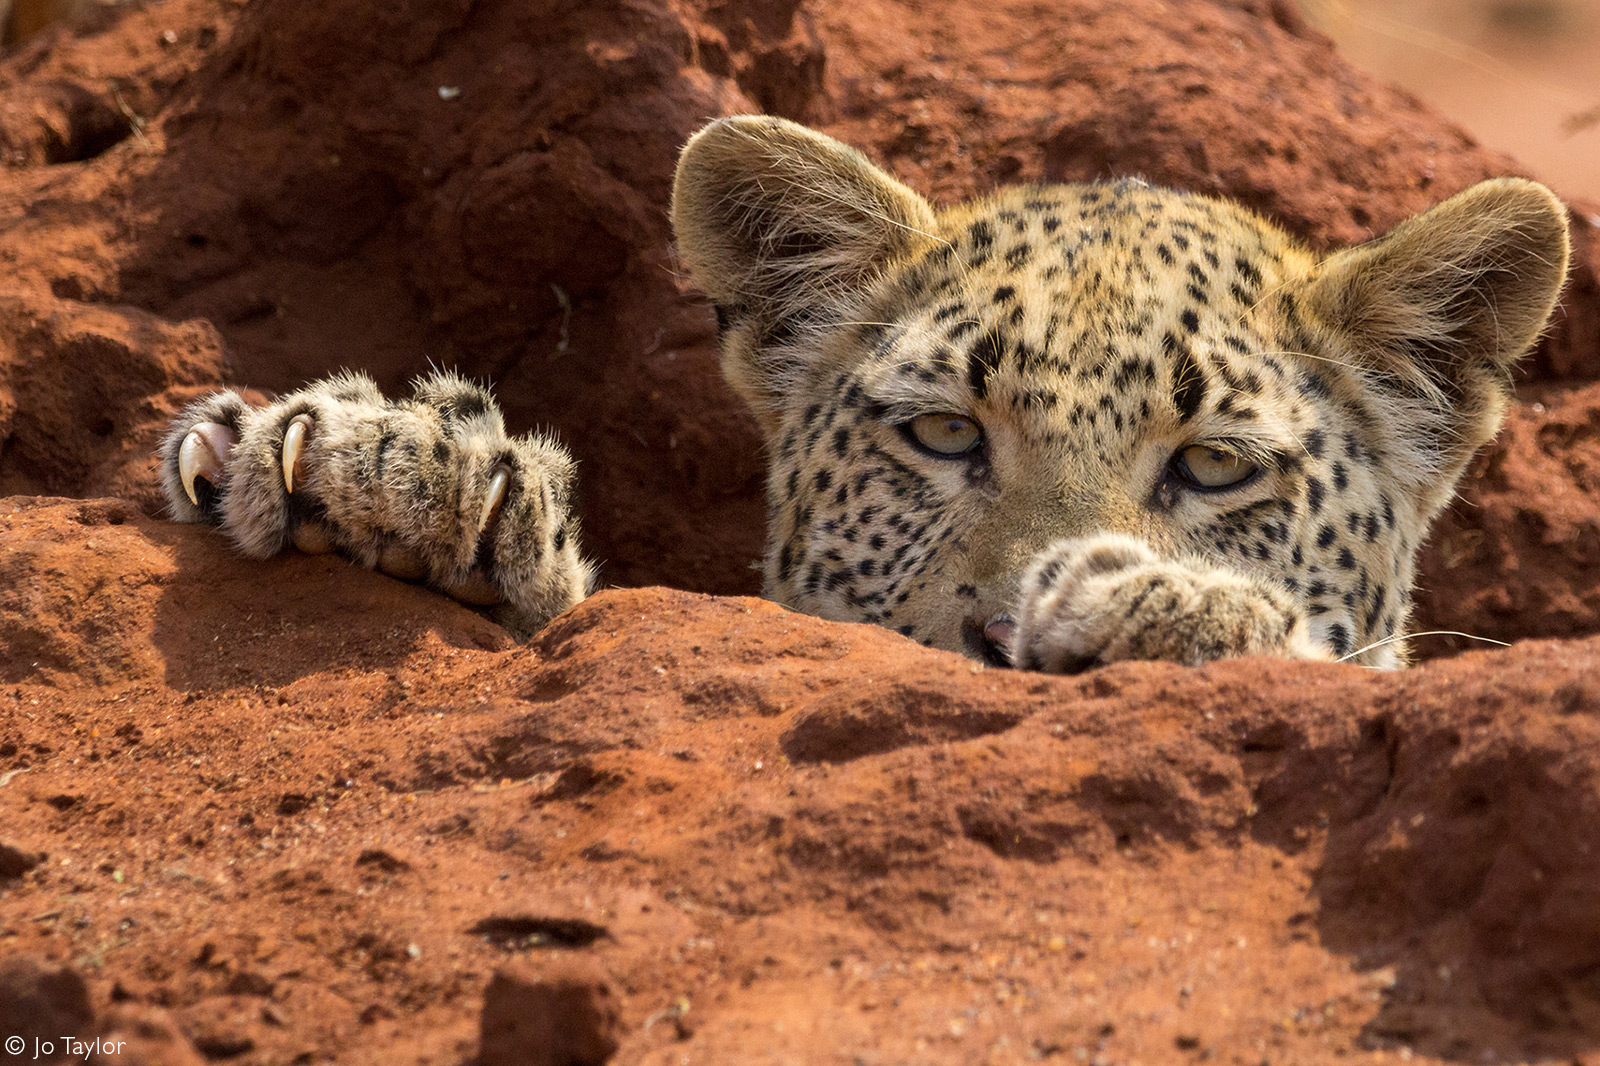 A leopard cub pops his head out of an excavated termite mound. Madikwe Game Reserve, South Africa © Jo Taylor